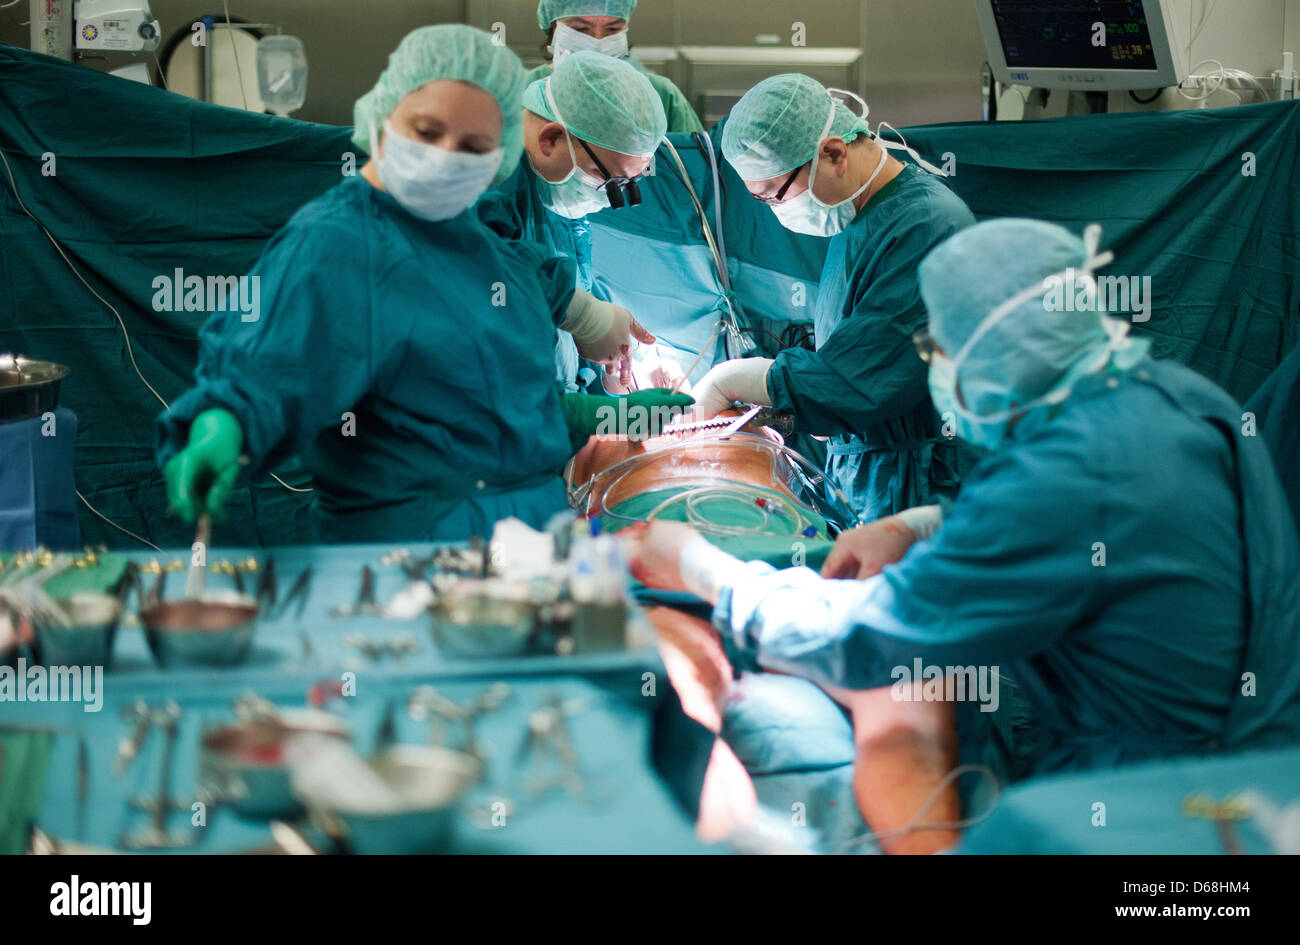 A team of doctors operates on a patient's heart at the German Heart Institute in Berlin, Gewrmany, 12 July 2012. Since 1987 more than 70,000 open-heart surgeries have been performed here. Photo: Maurizio Gambarini Stock Photo